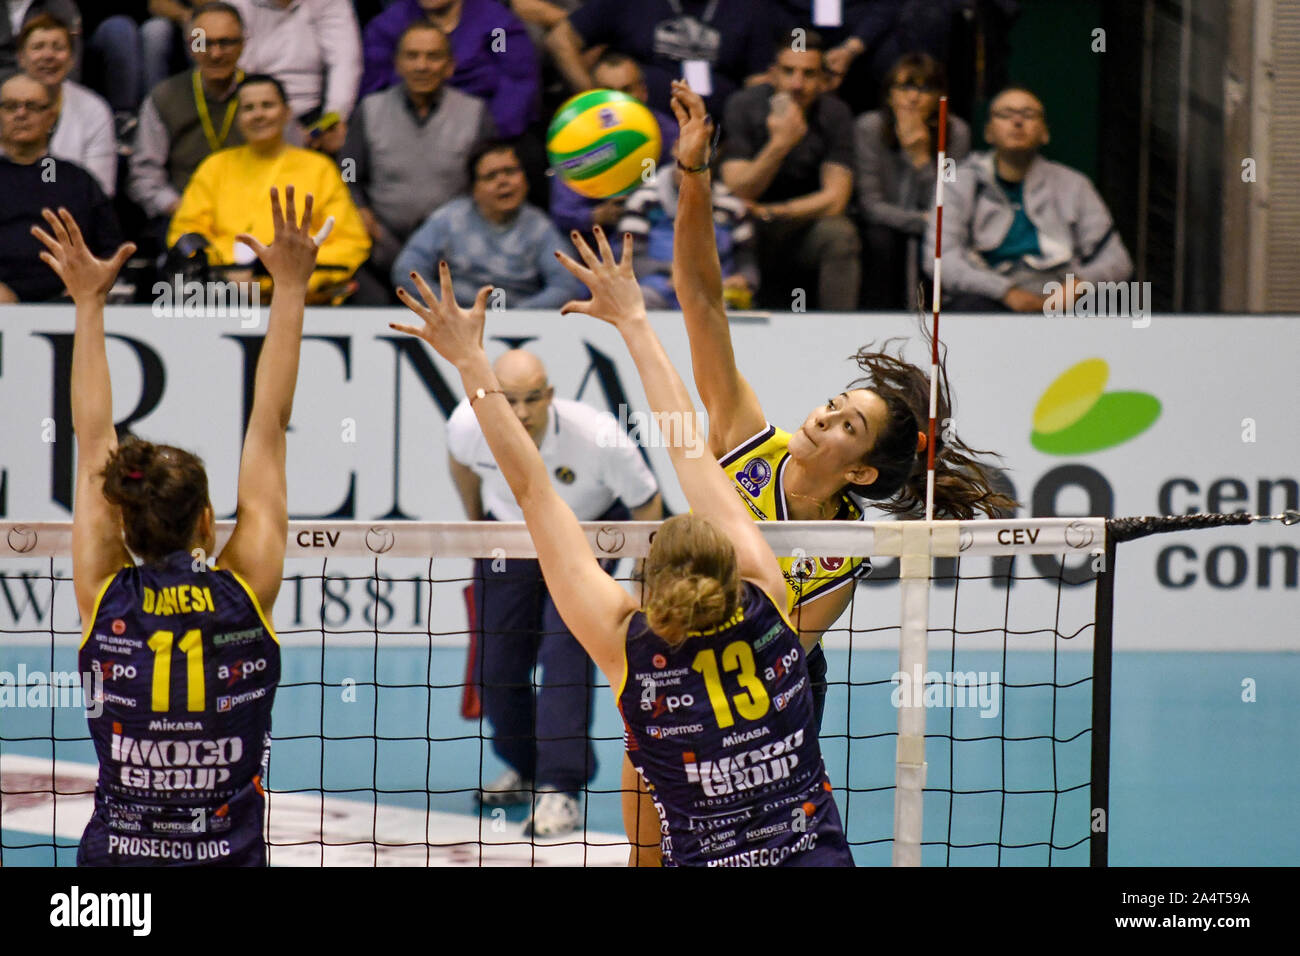 Samantha Bricio during CEV Semifinals 2019 - Imoco Conegliano vs  Fenerbahçe, Treviso, Italy, 02 Apr 2019, Volleyball Volleyball Champions  League Wome Stock Photo - Alamy